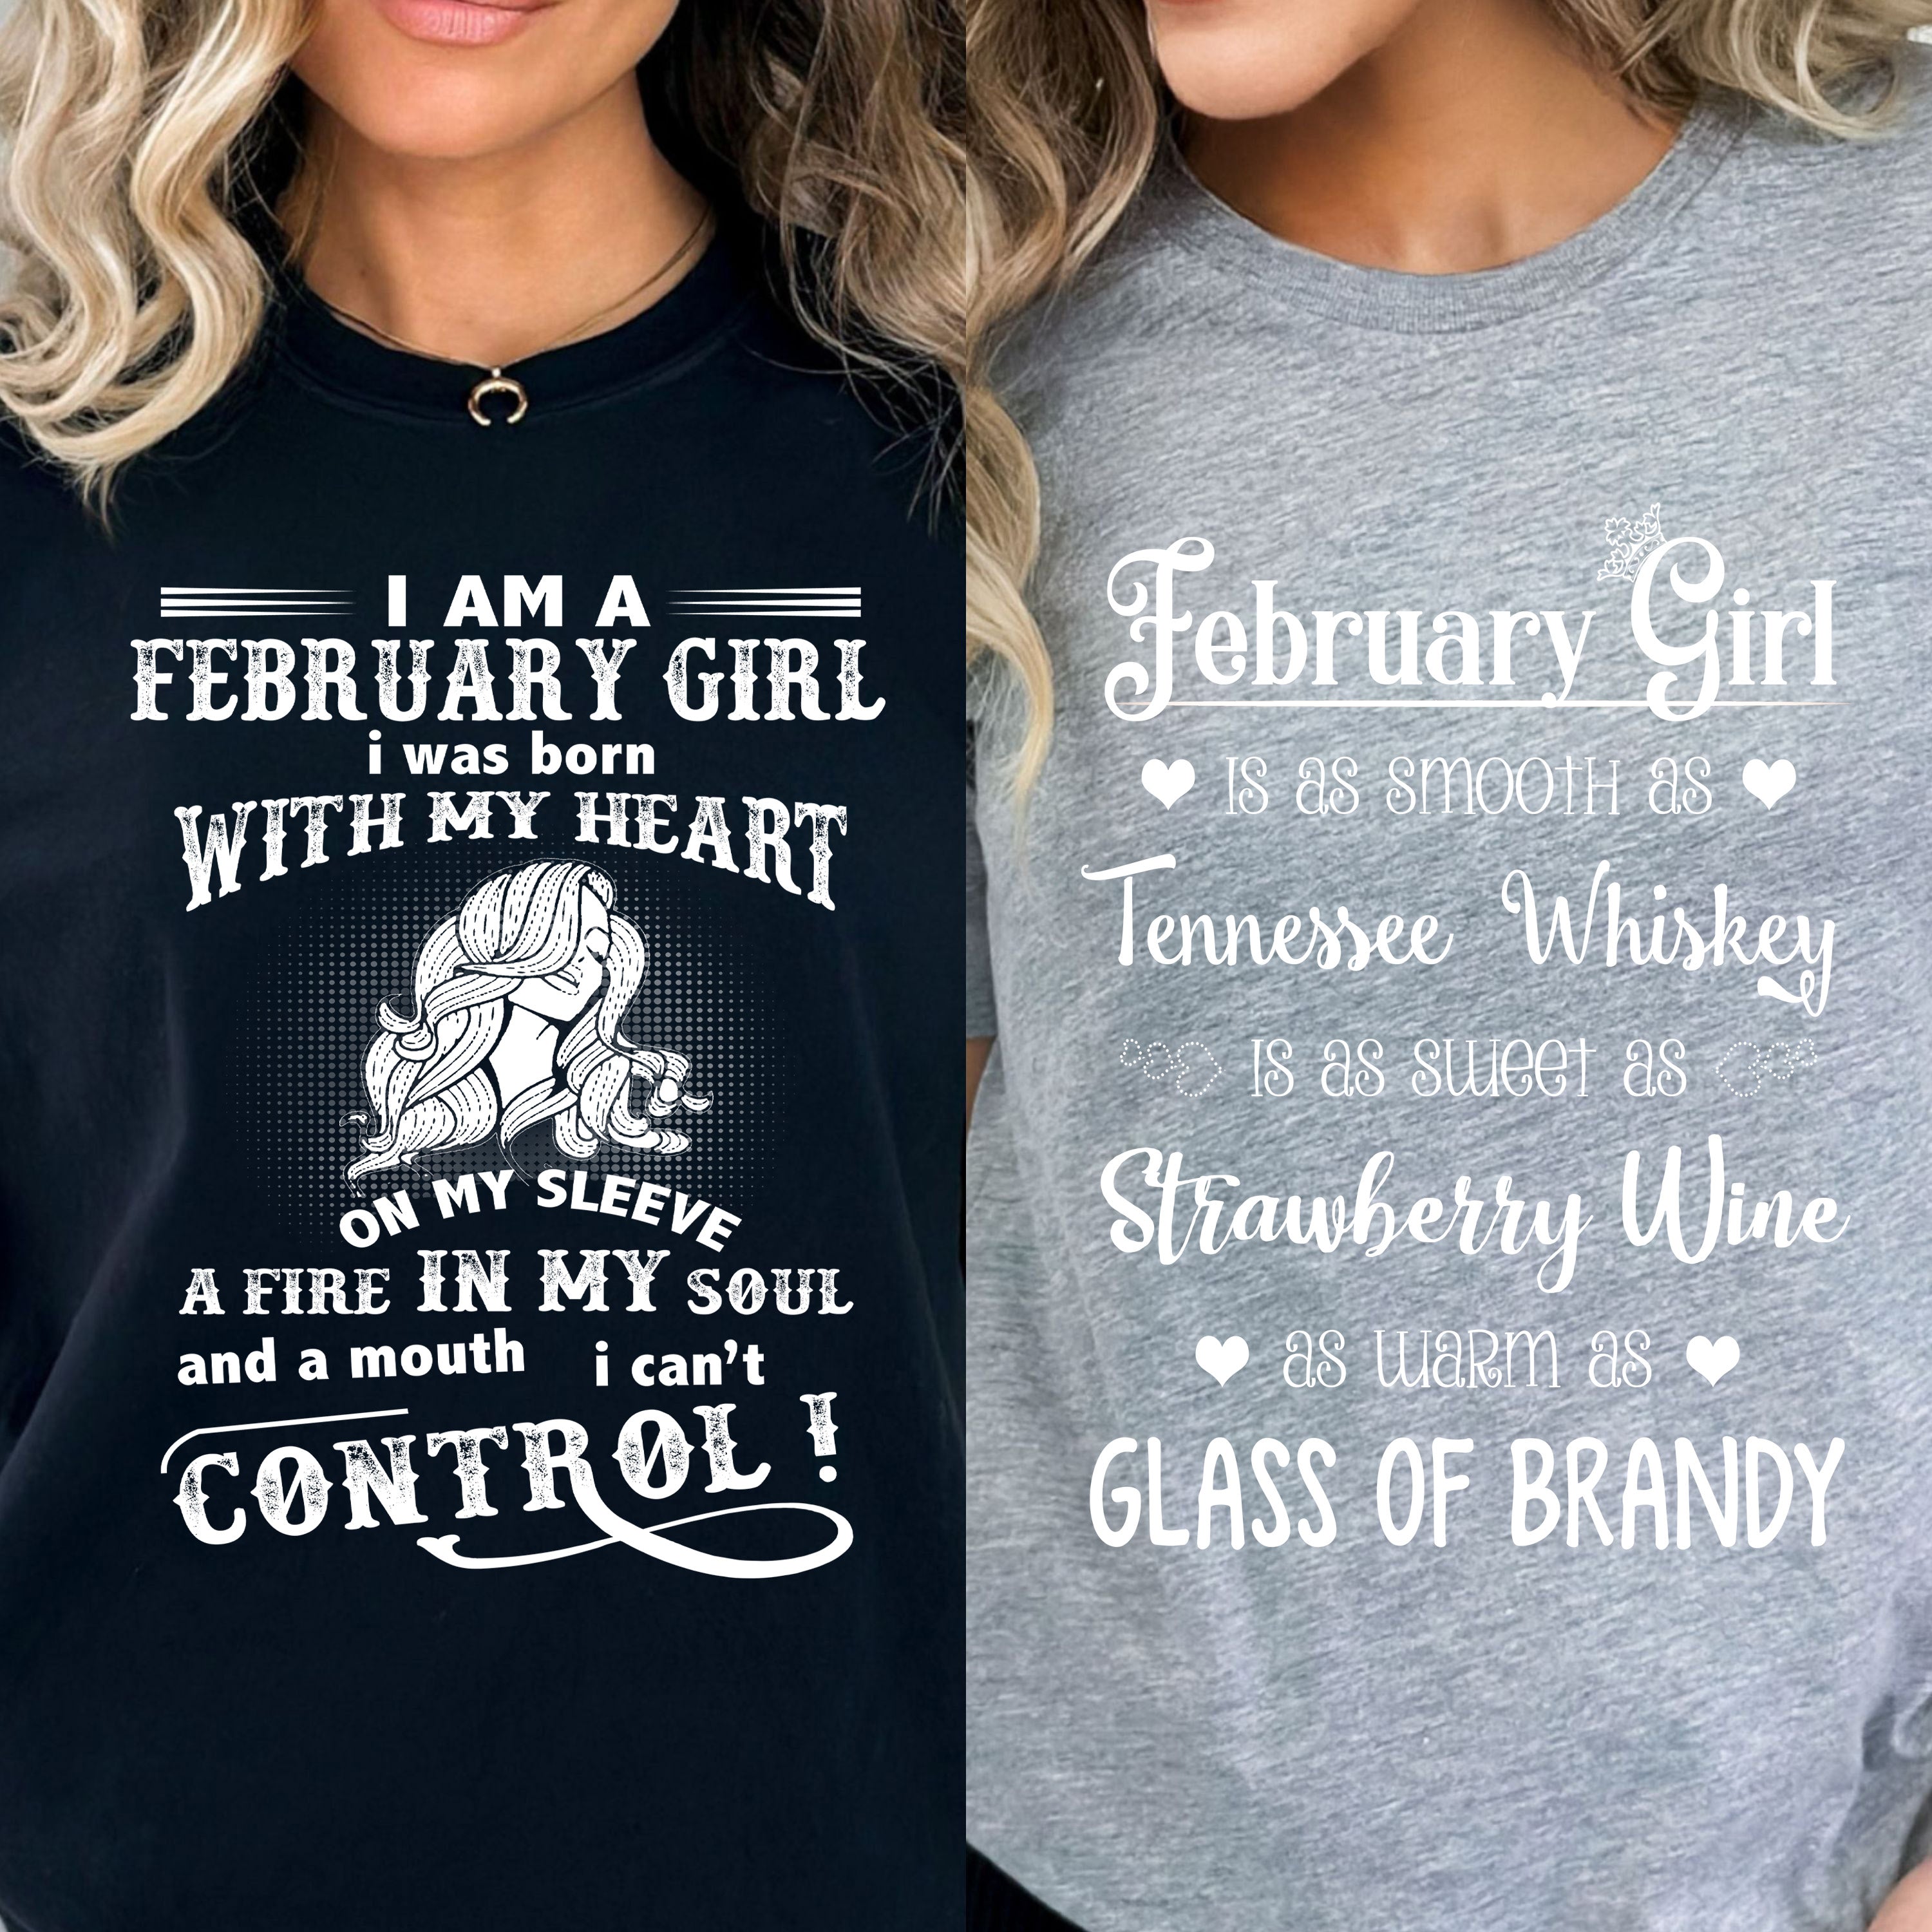 "February Whiskey + Control -Pack of 2".